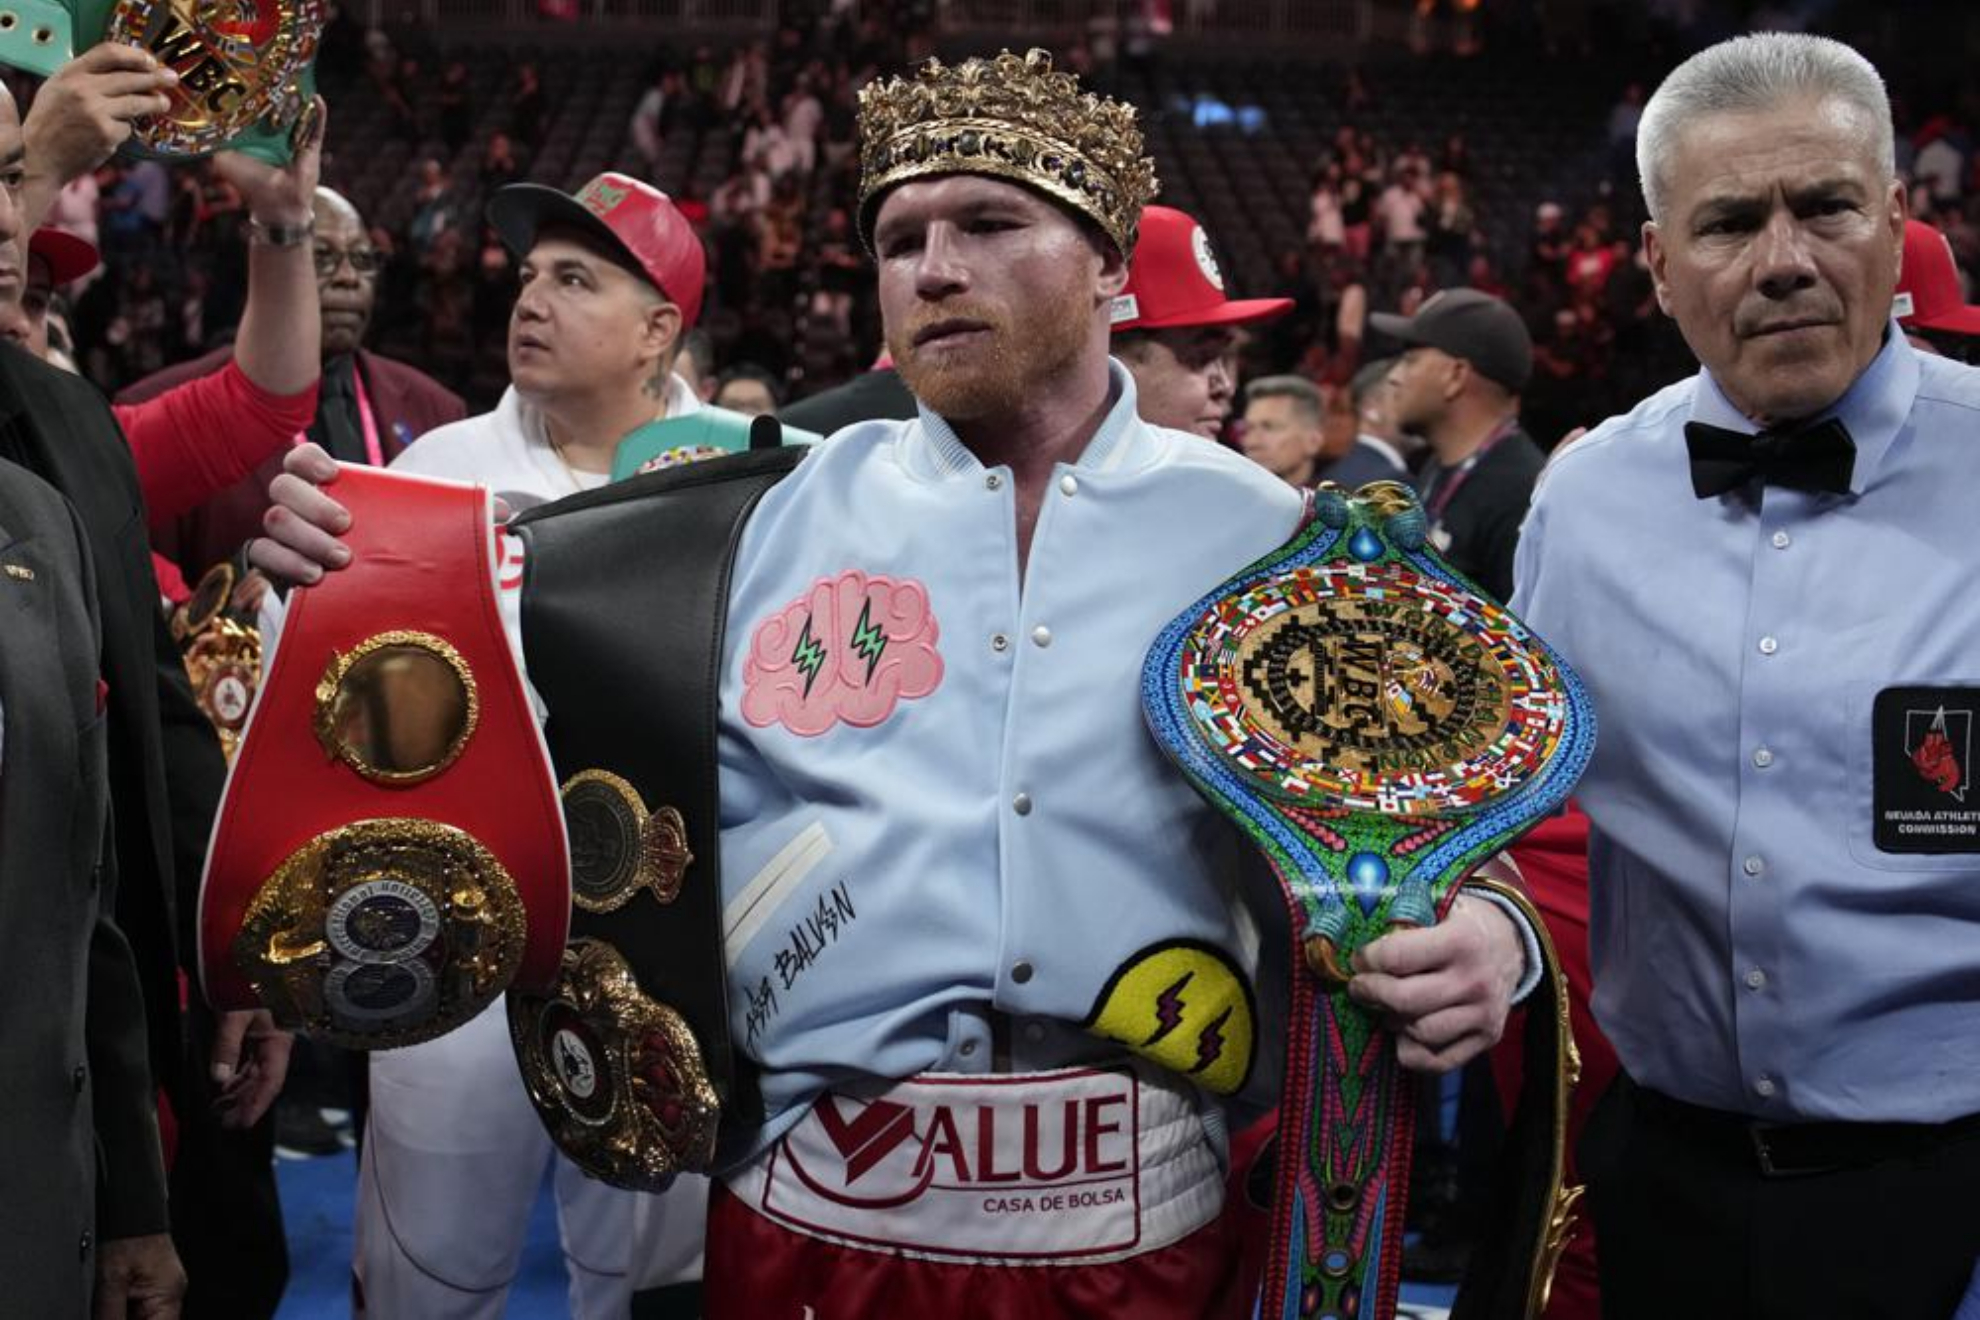 Saul "Canelo" Alvarez after his fight with Gennady Golovkin.